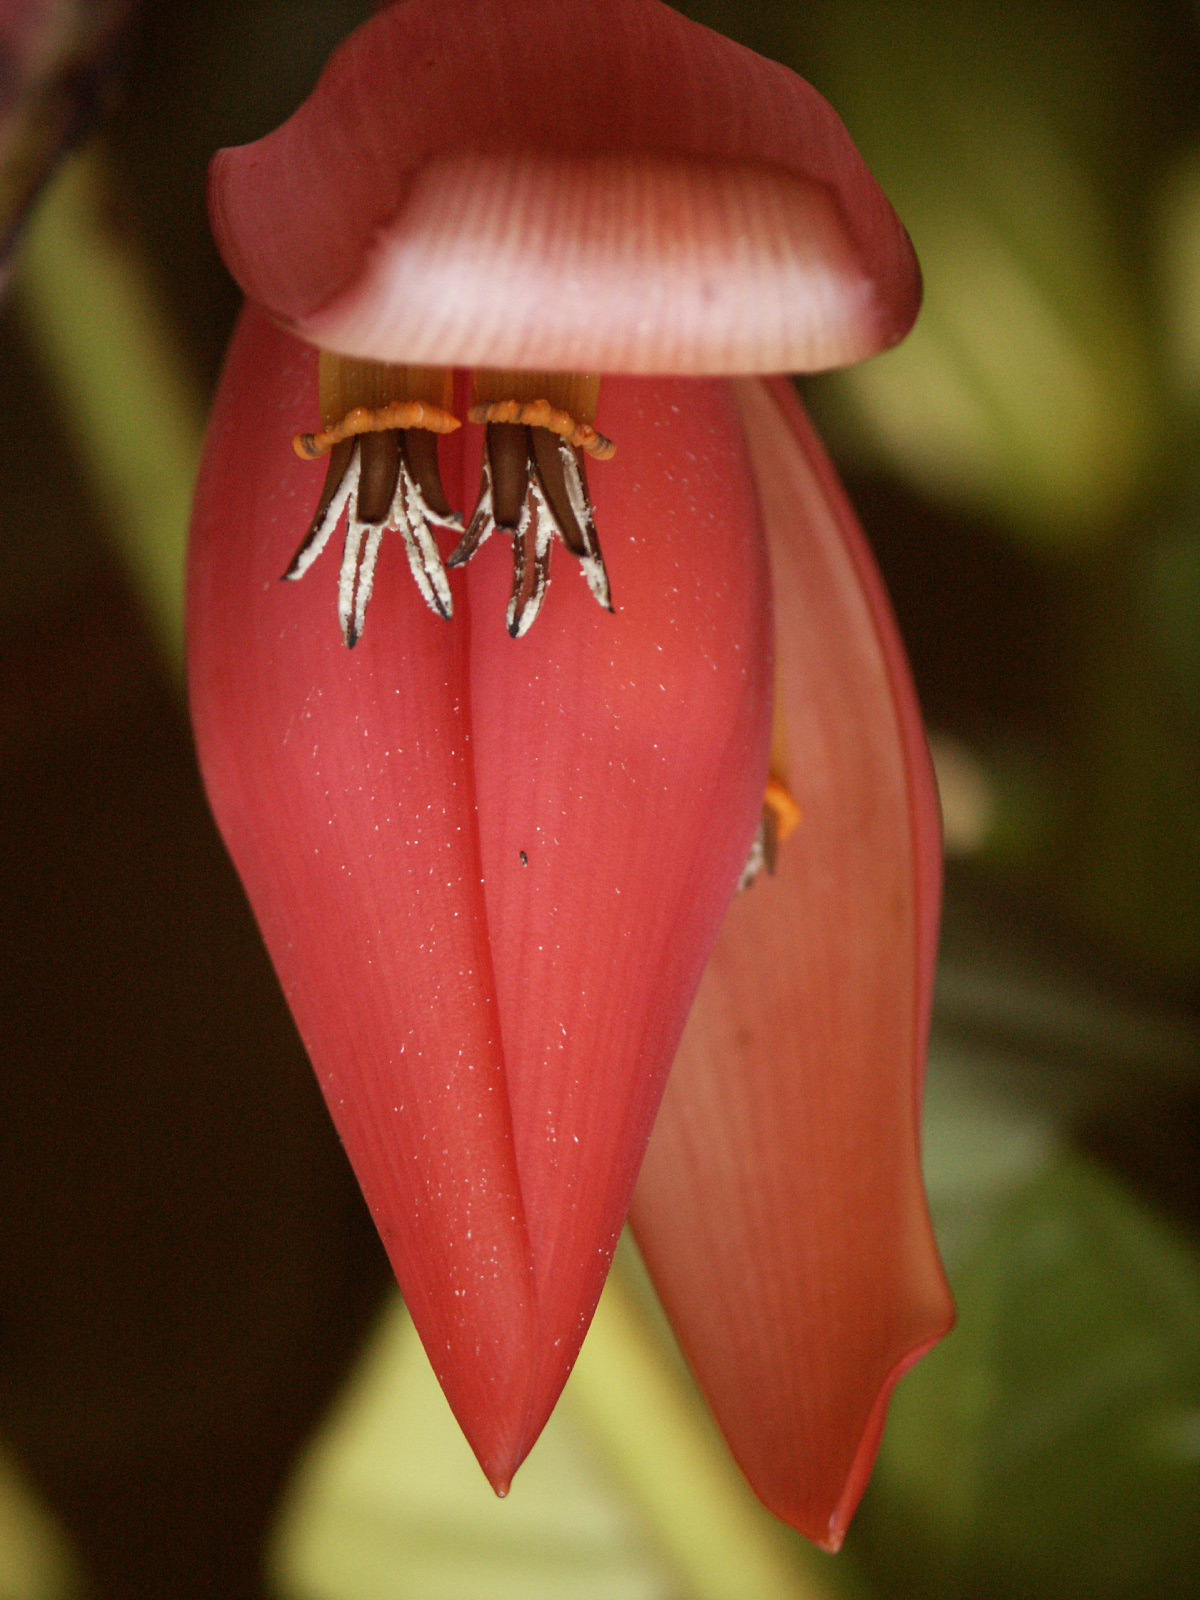 Wild banana flower found by WWF in the Greater Mekong